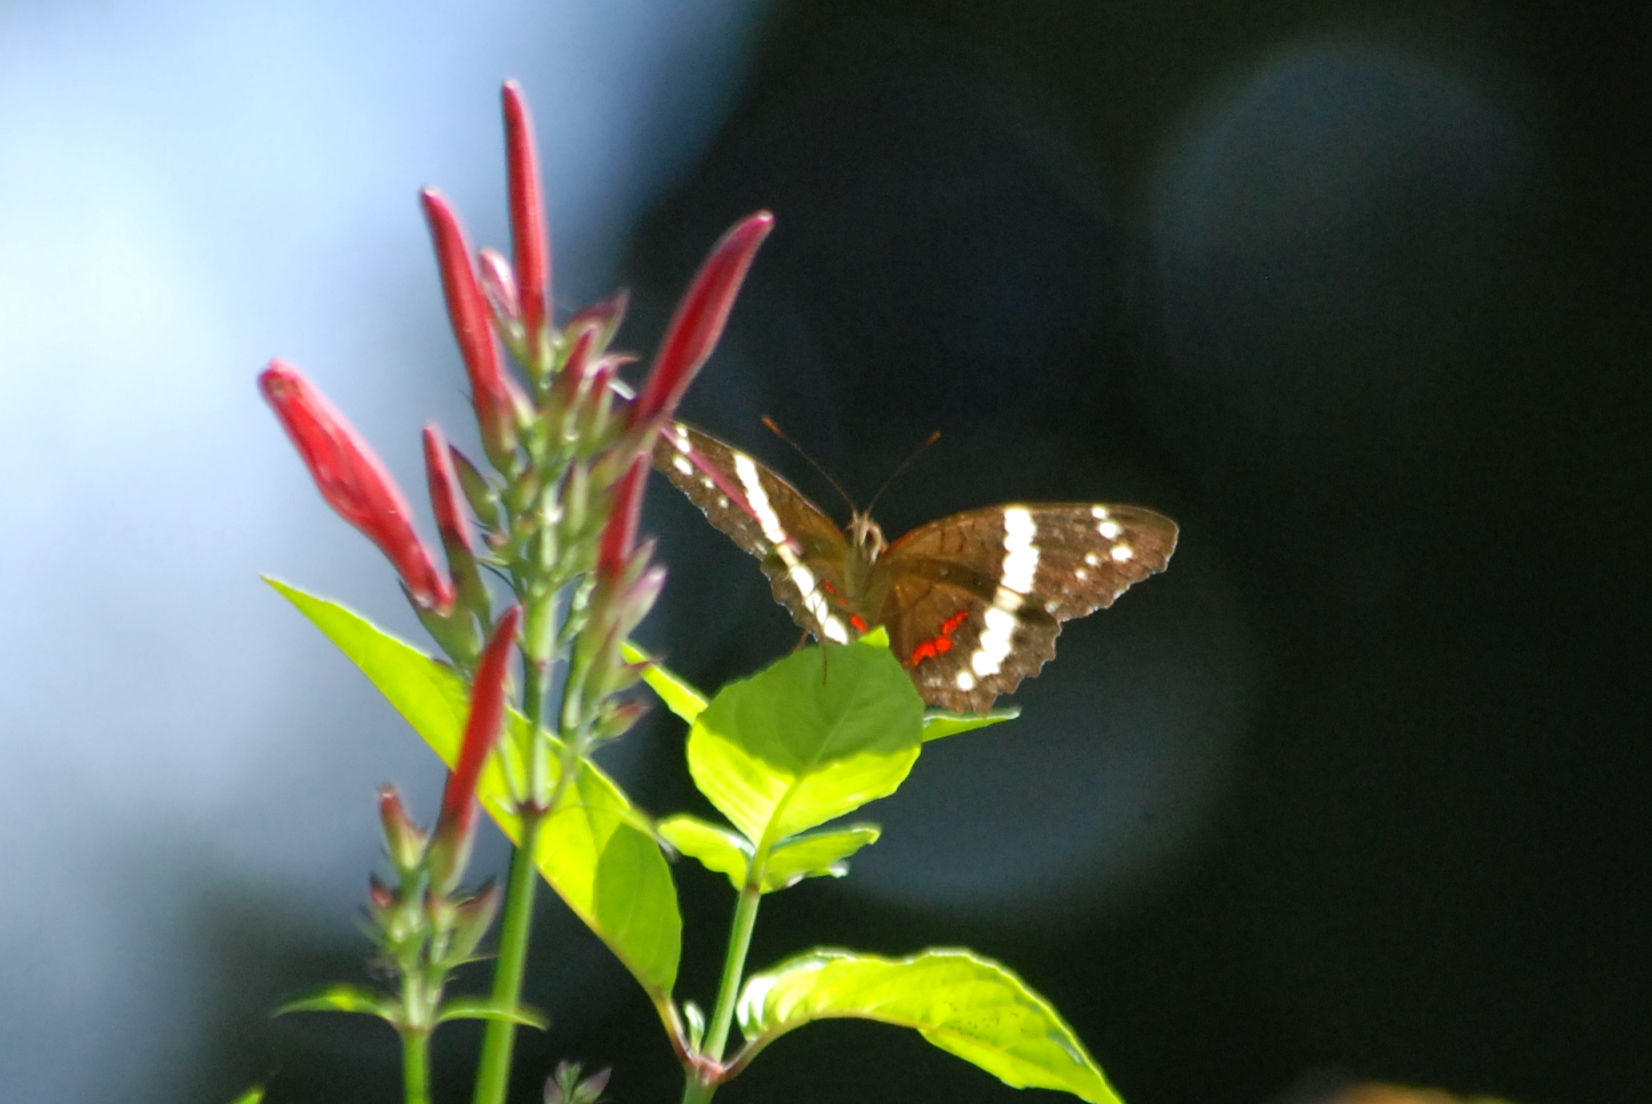 Click picture to see more Panamanian Butterflies.